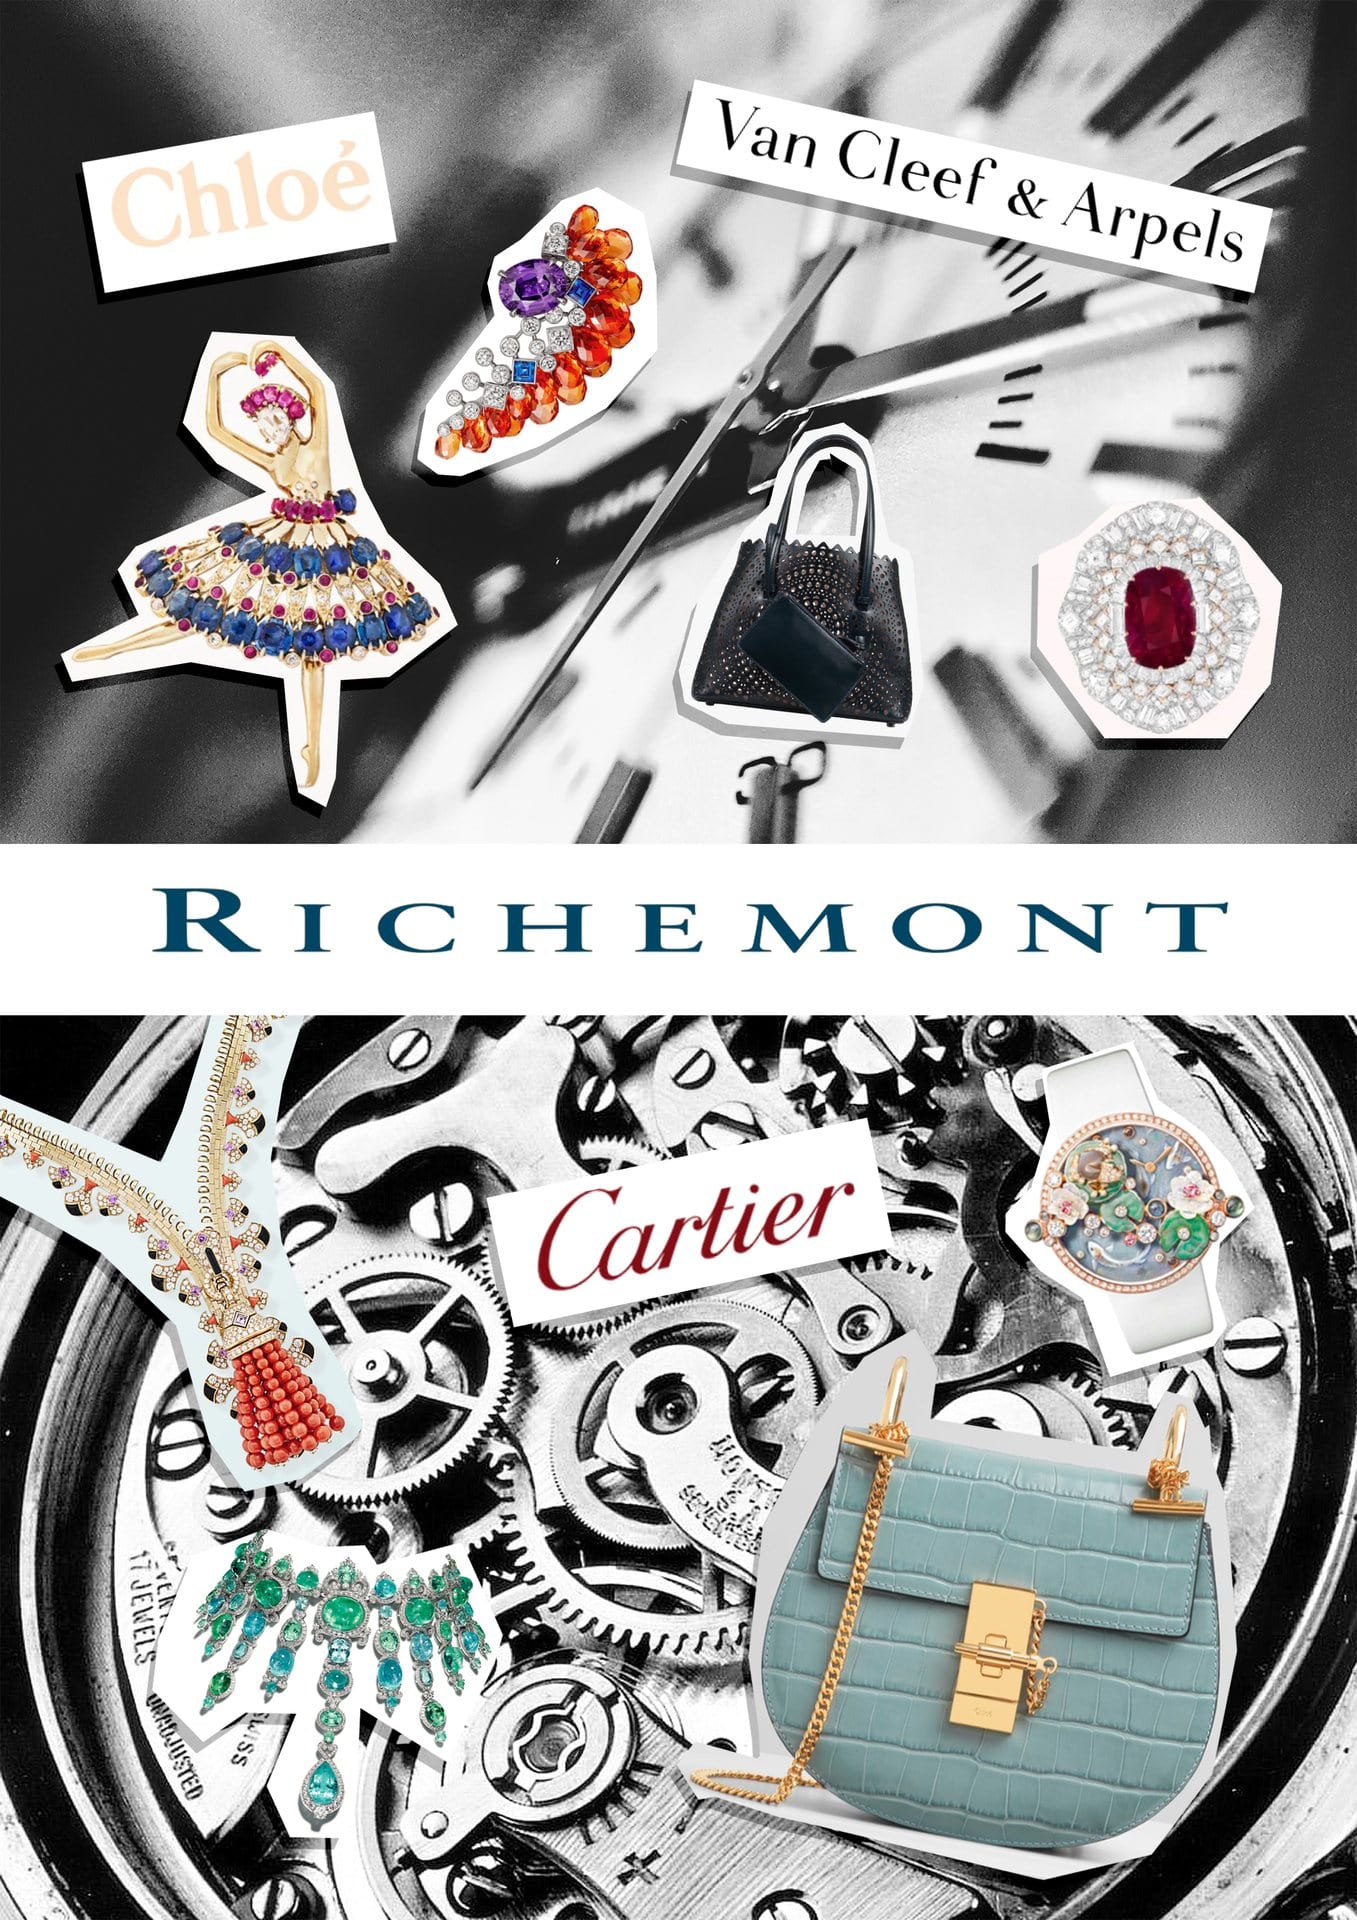 The Richemont series - Episode one: Ousting its HR will not solve Richemont’s management problems. They run deeper. Here’s why.